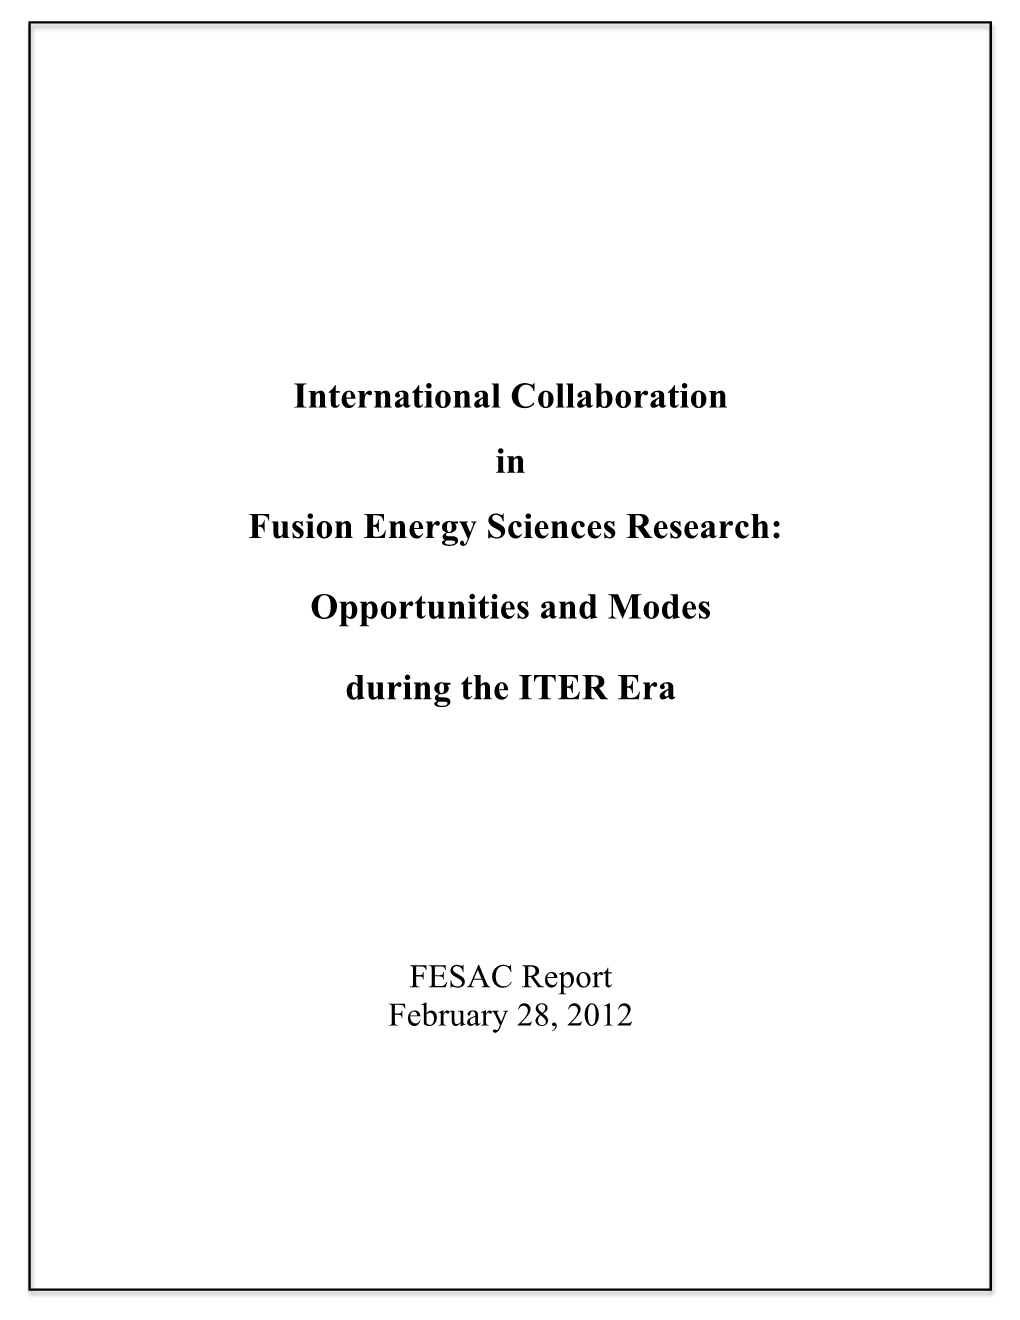 International Collaboration in Fusion Energy Sciences Research